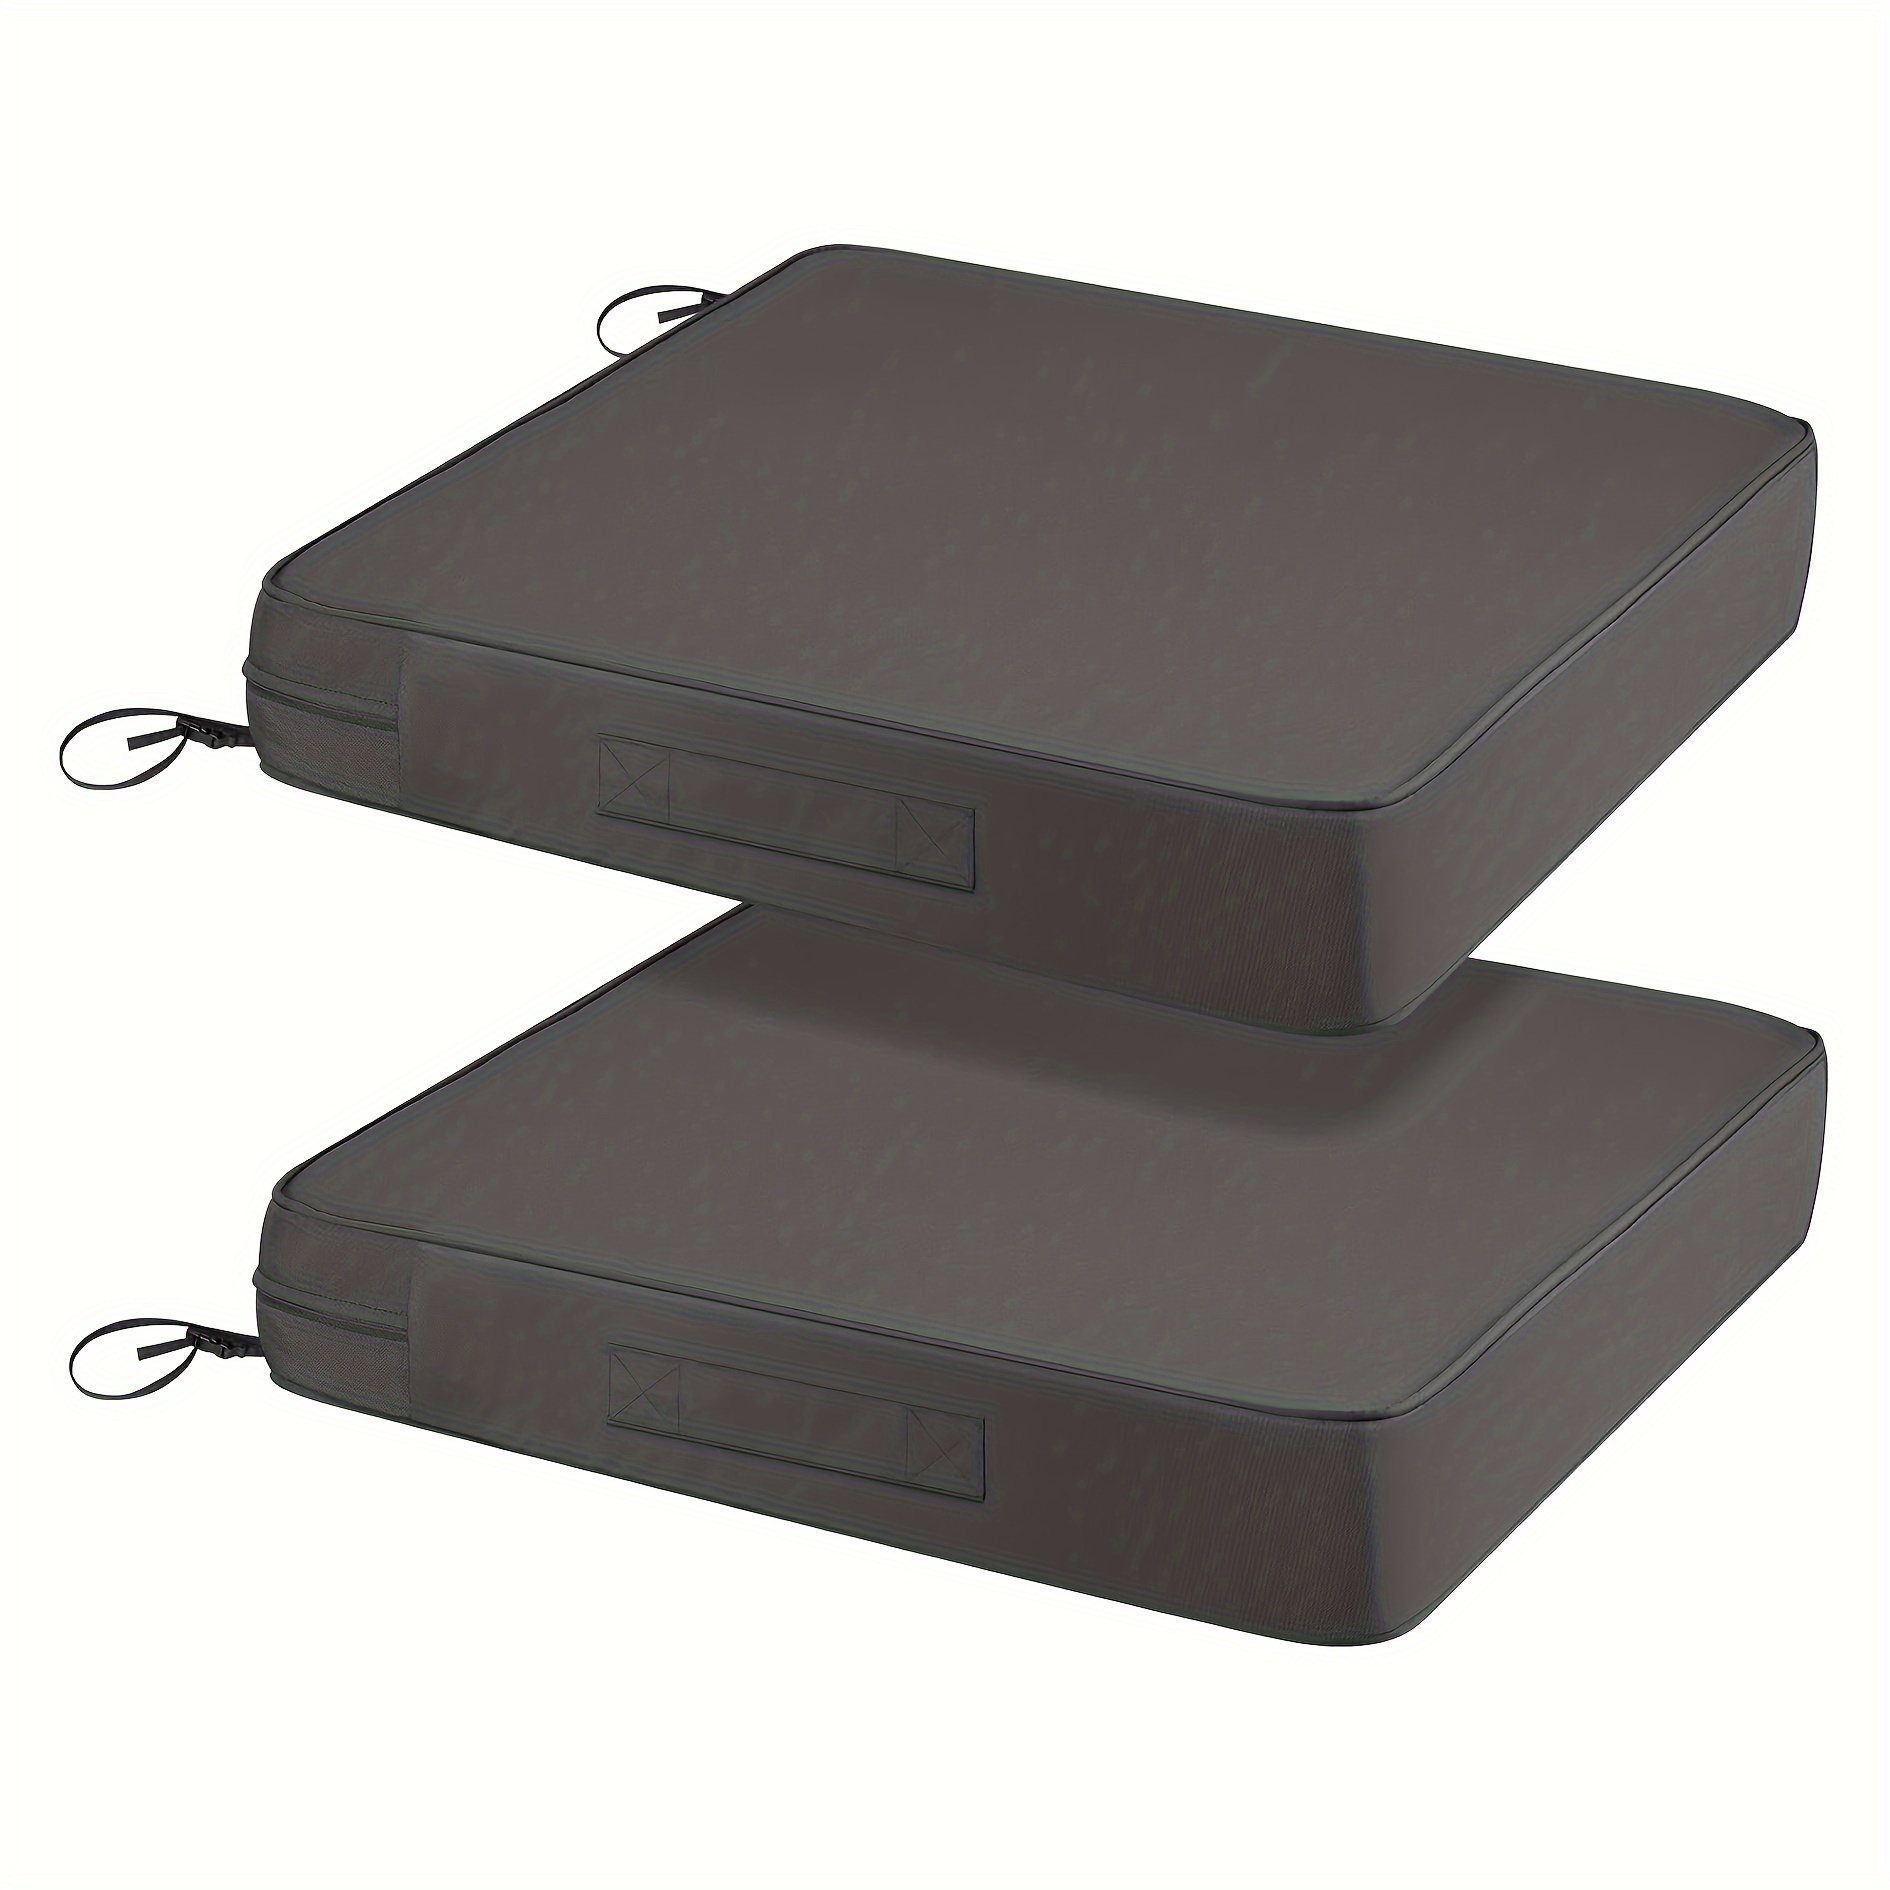 

2pcs Sponge Seat Cushions, High-density Sponge, Waterproof, Portable Cushions, Suitable For Indoors, Outdoors, Office, Car